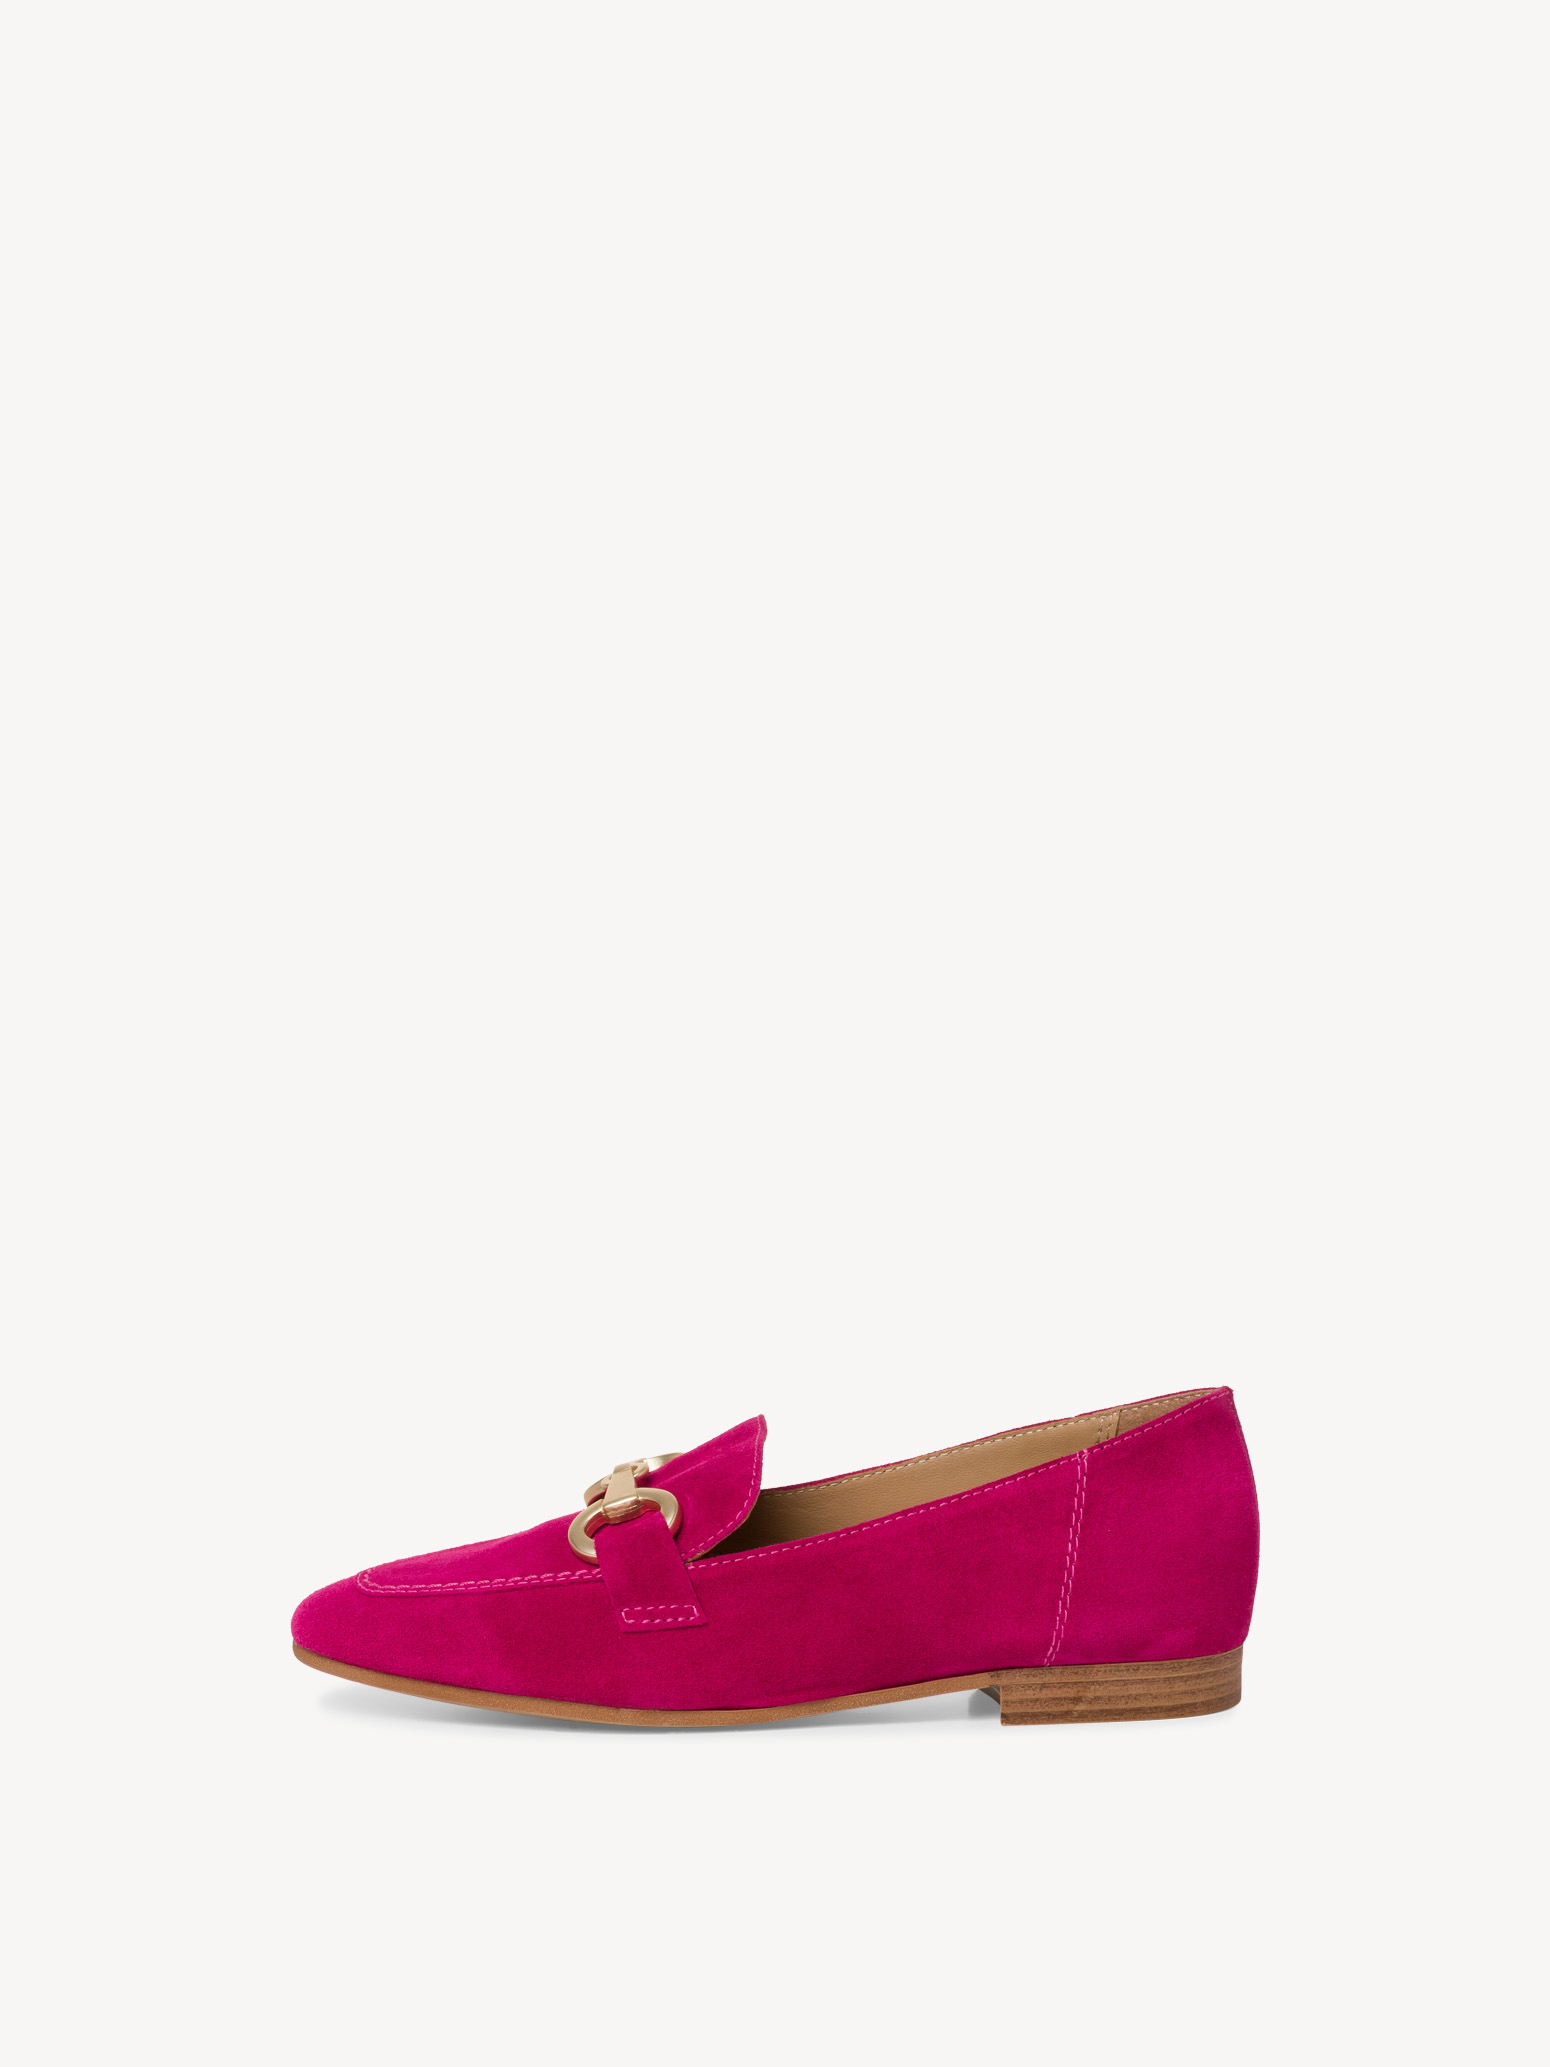 Leather Slipper - pink